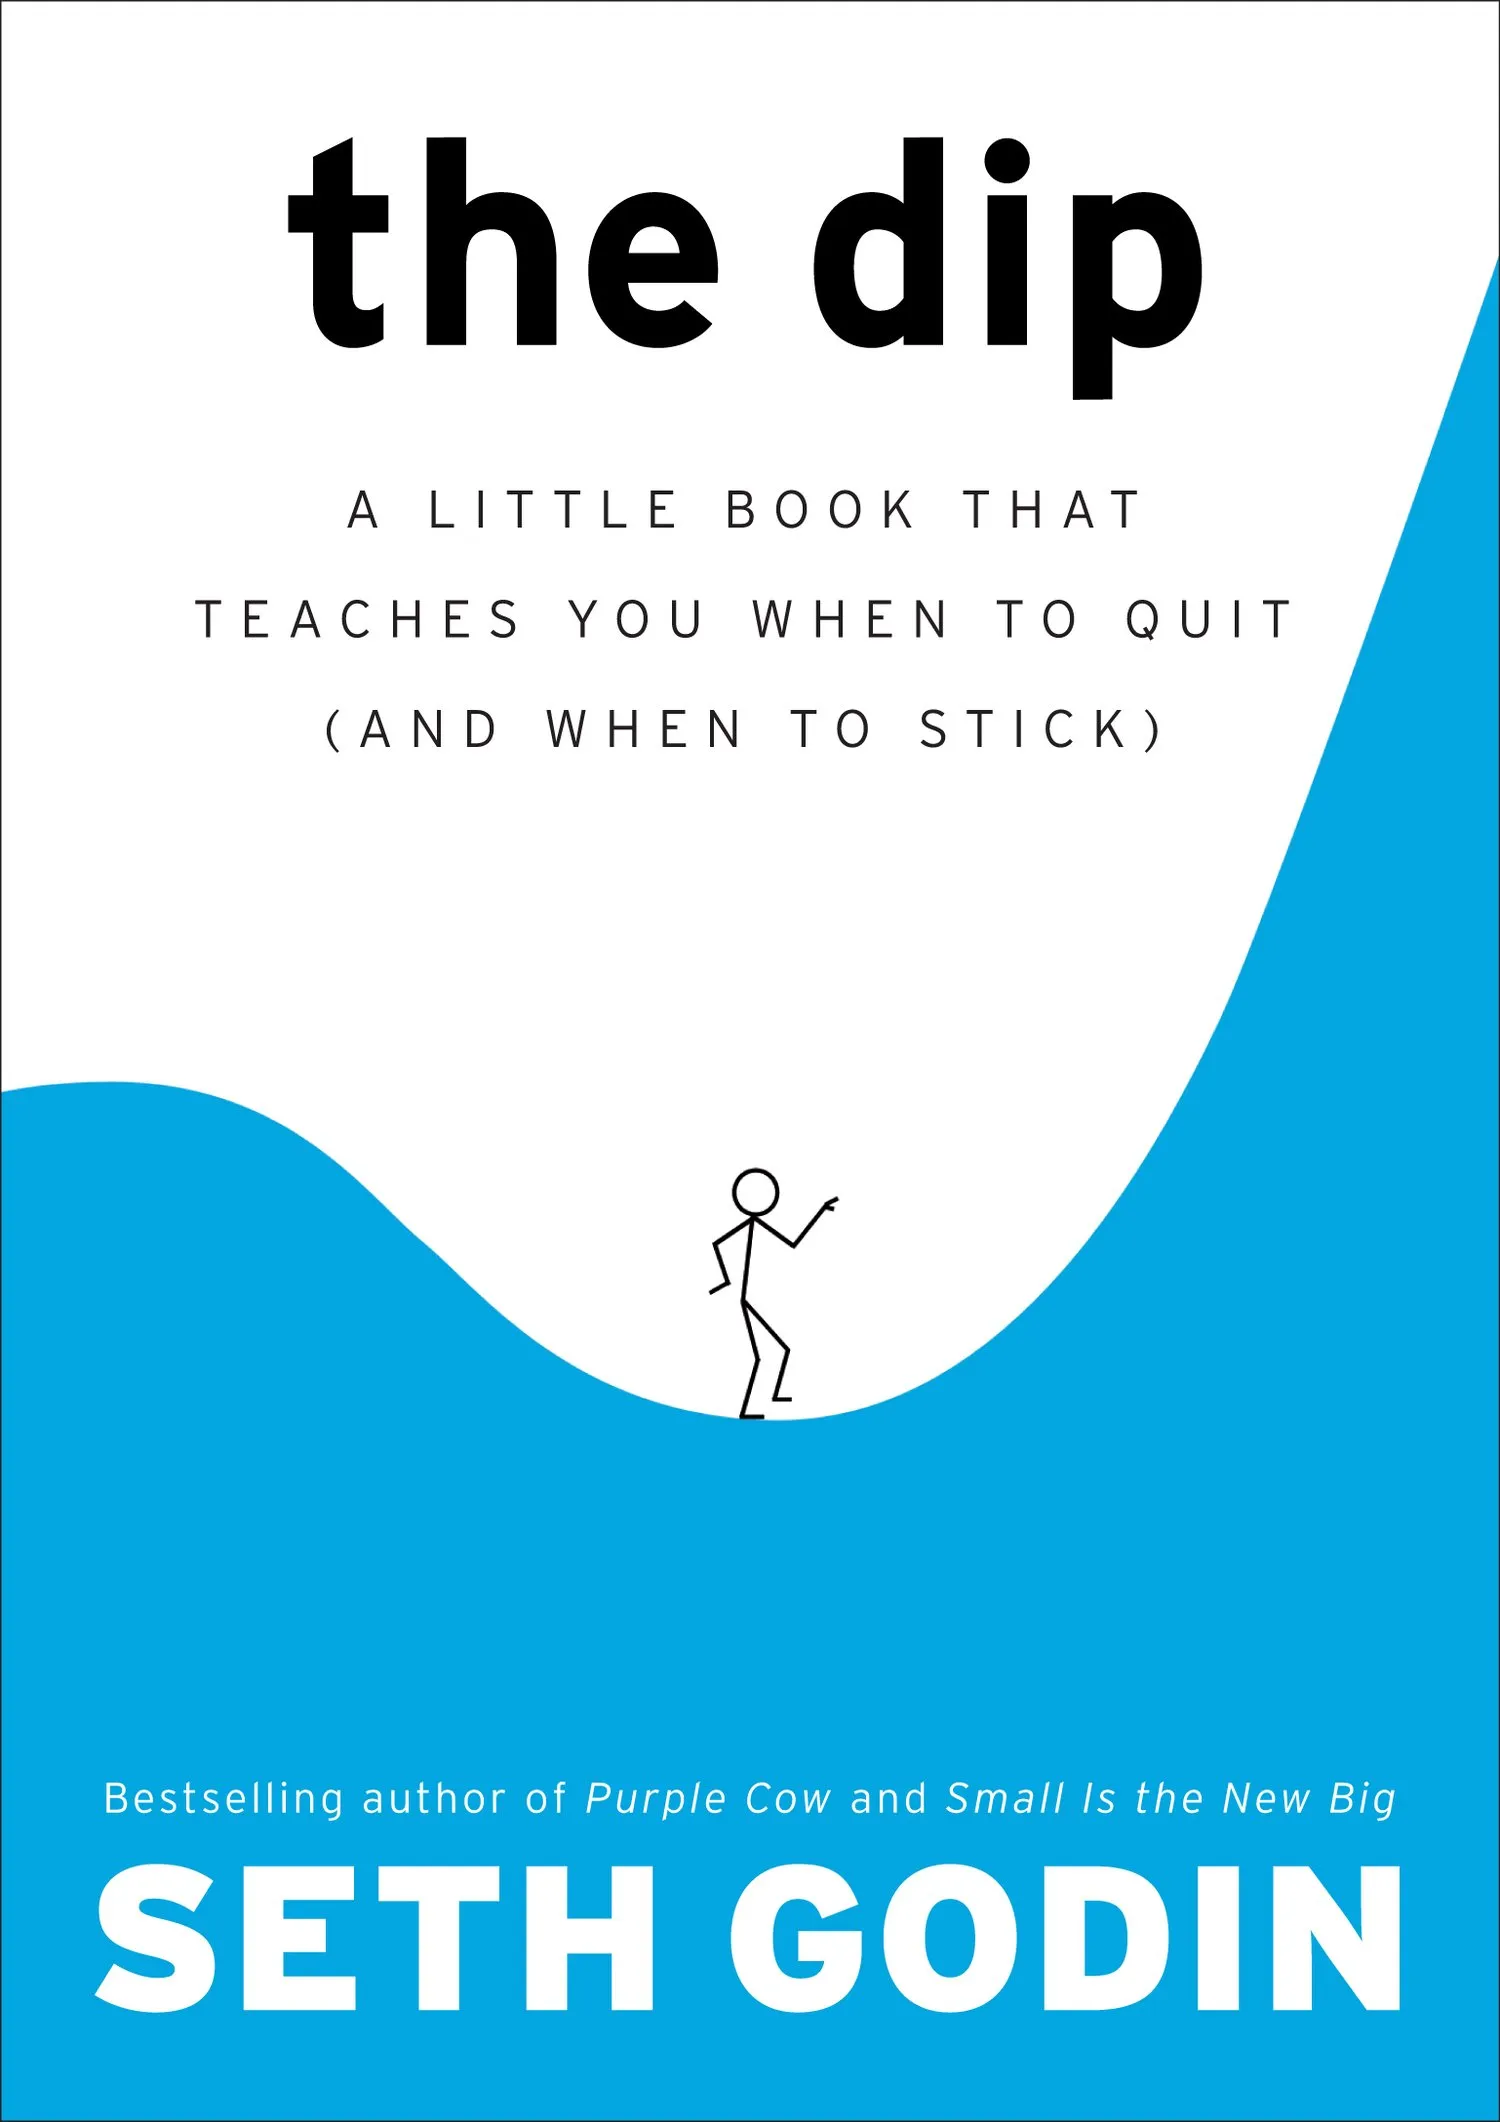 Cover of the book title The Dip